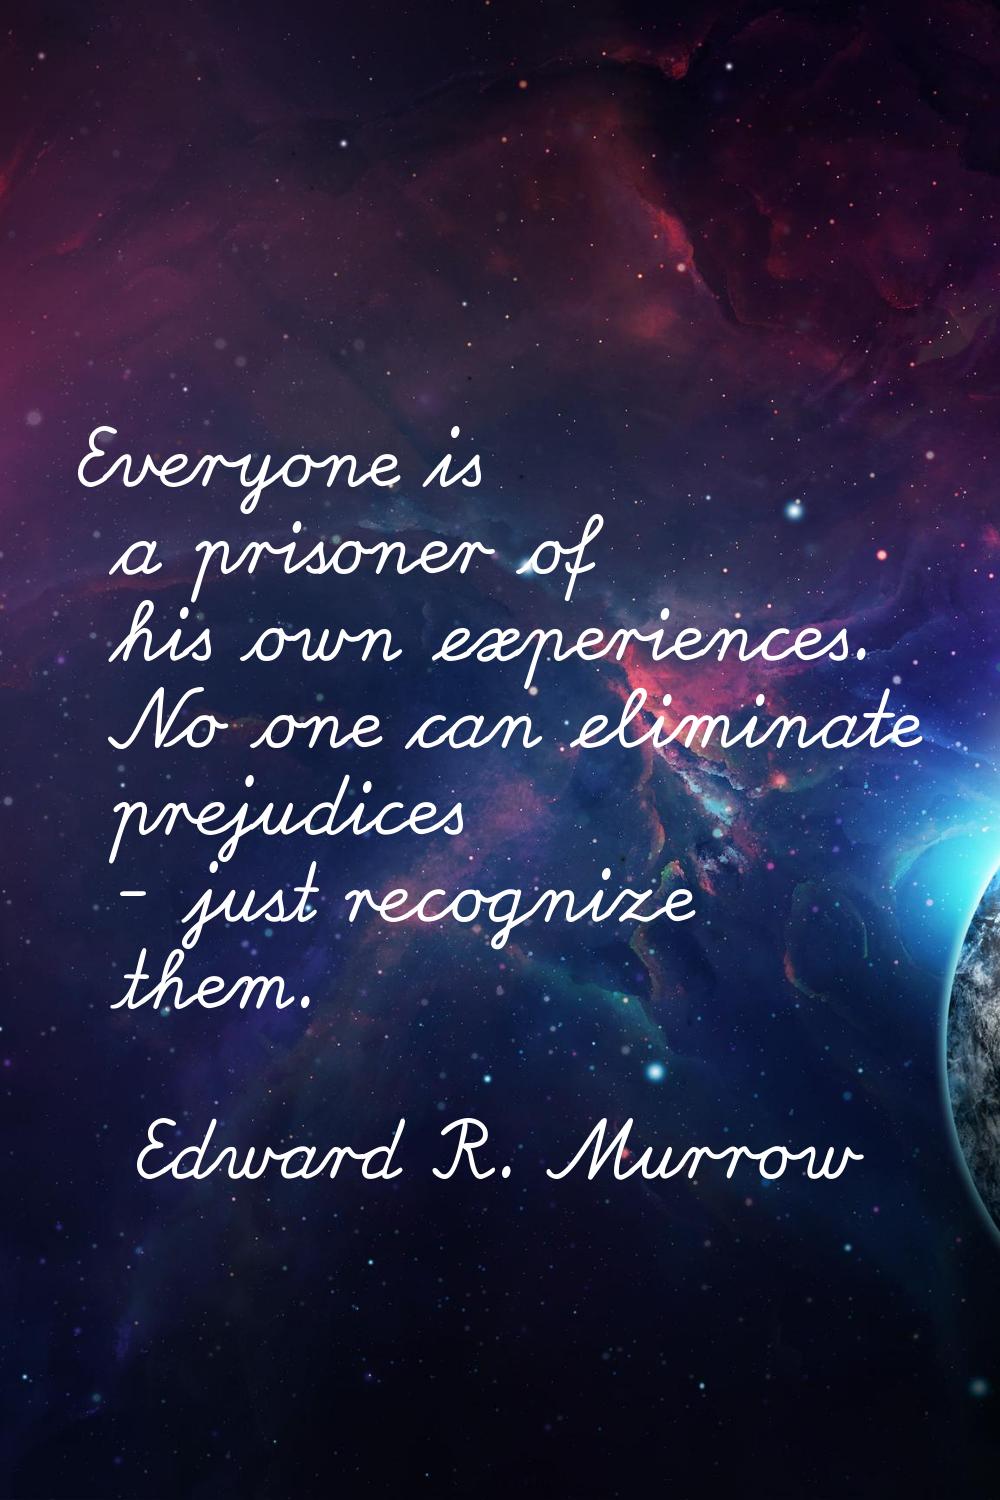 Everyone is a prisoner of his own experiences. No one can eliminate prejudices - just recognize the